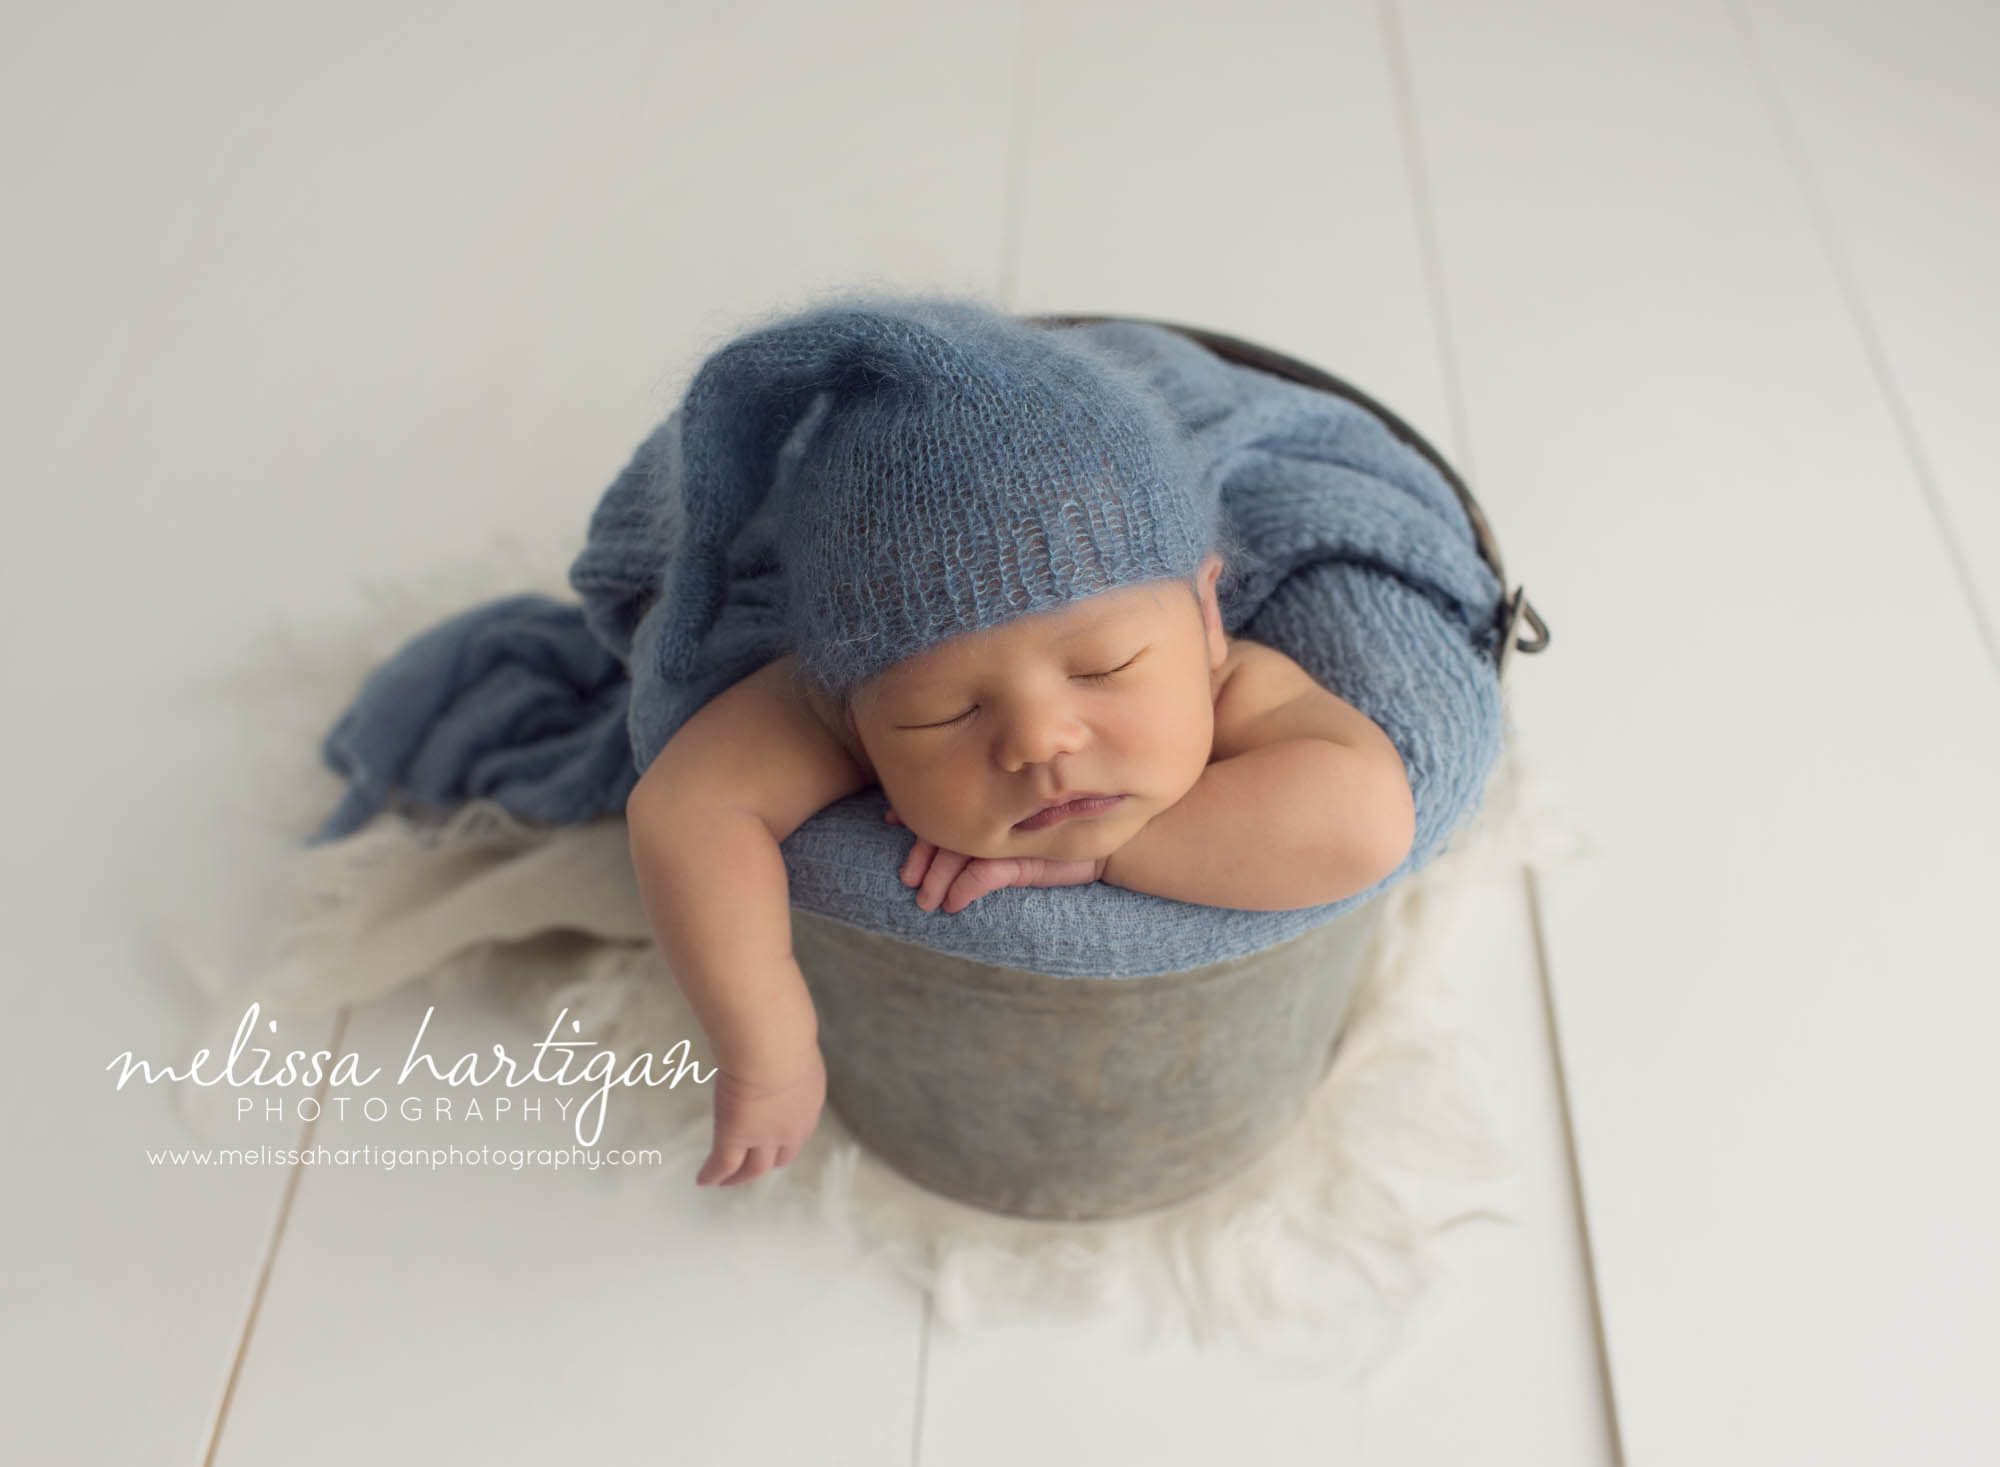 Melissa Hartigan Photography Maternity and Newborn Connecticut Photographer Lucas Newborn Session Baby boy sleeping in metal bucket with blue knit blanket and matching blue knit hat with arm sticking out